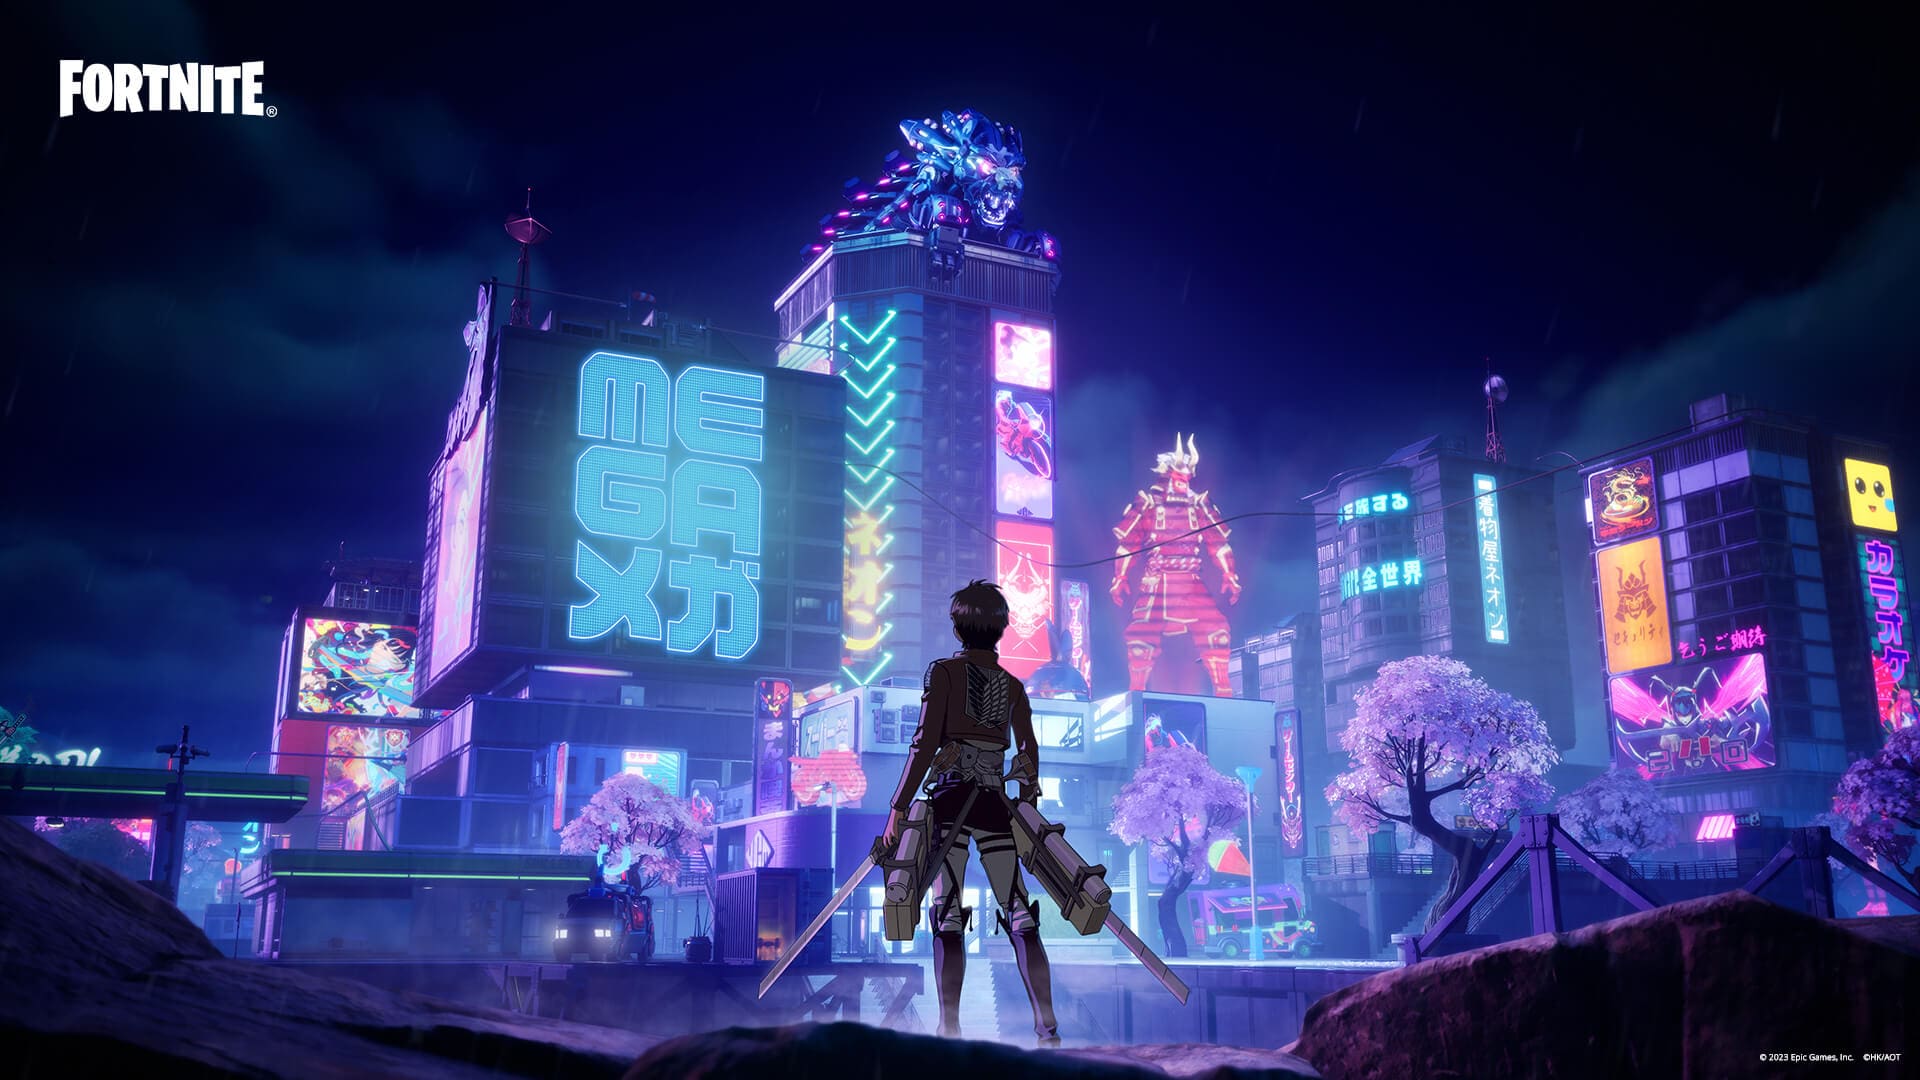 In Fornite a character from the Attack on Titan anime stands facing a sprawling futuristic city.